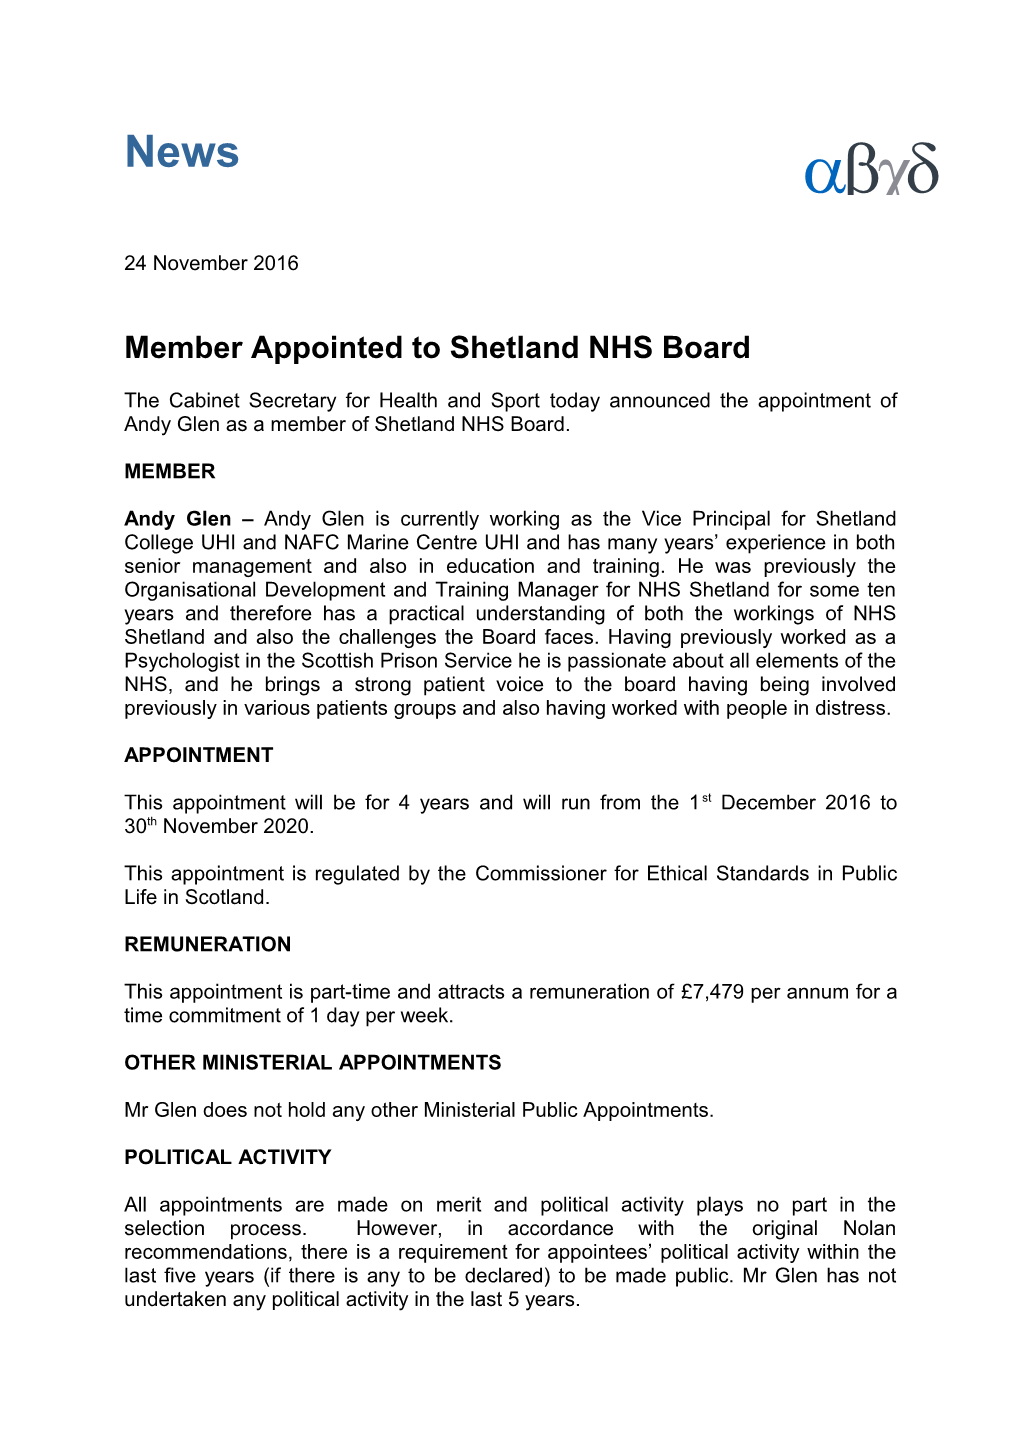 Member Appointed to Shetland NHS Board